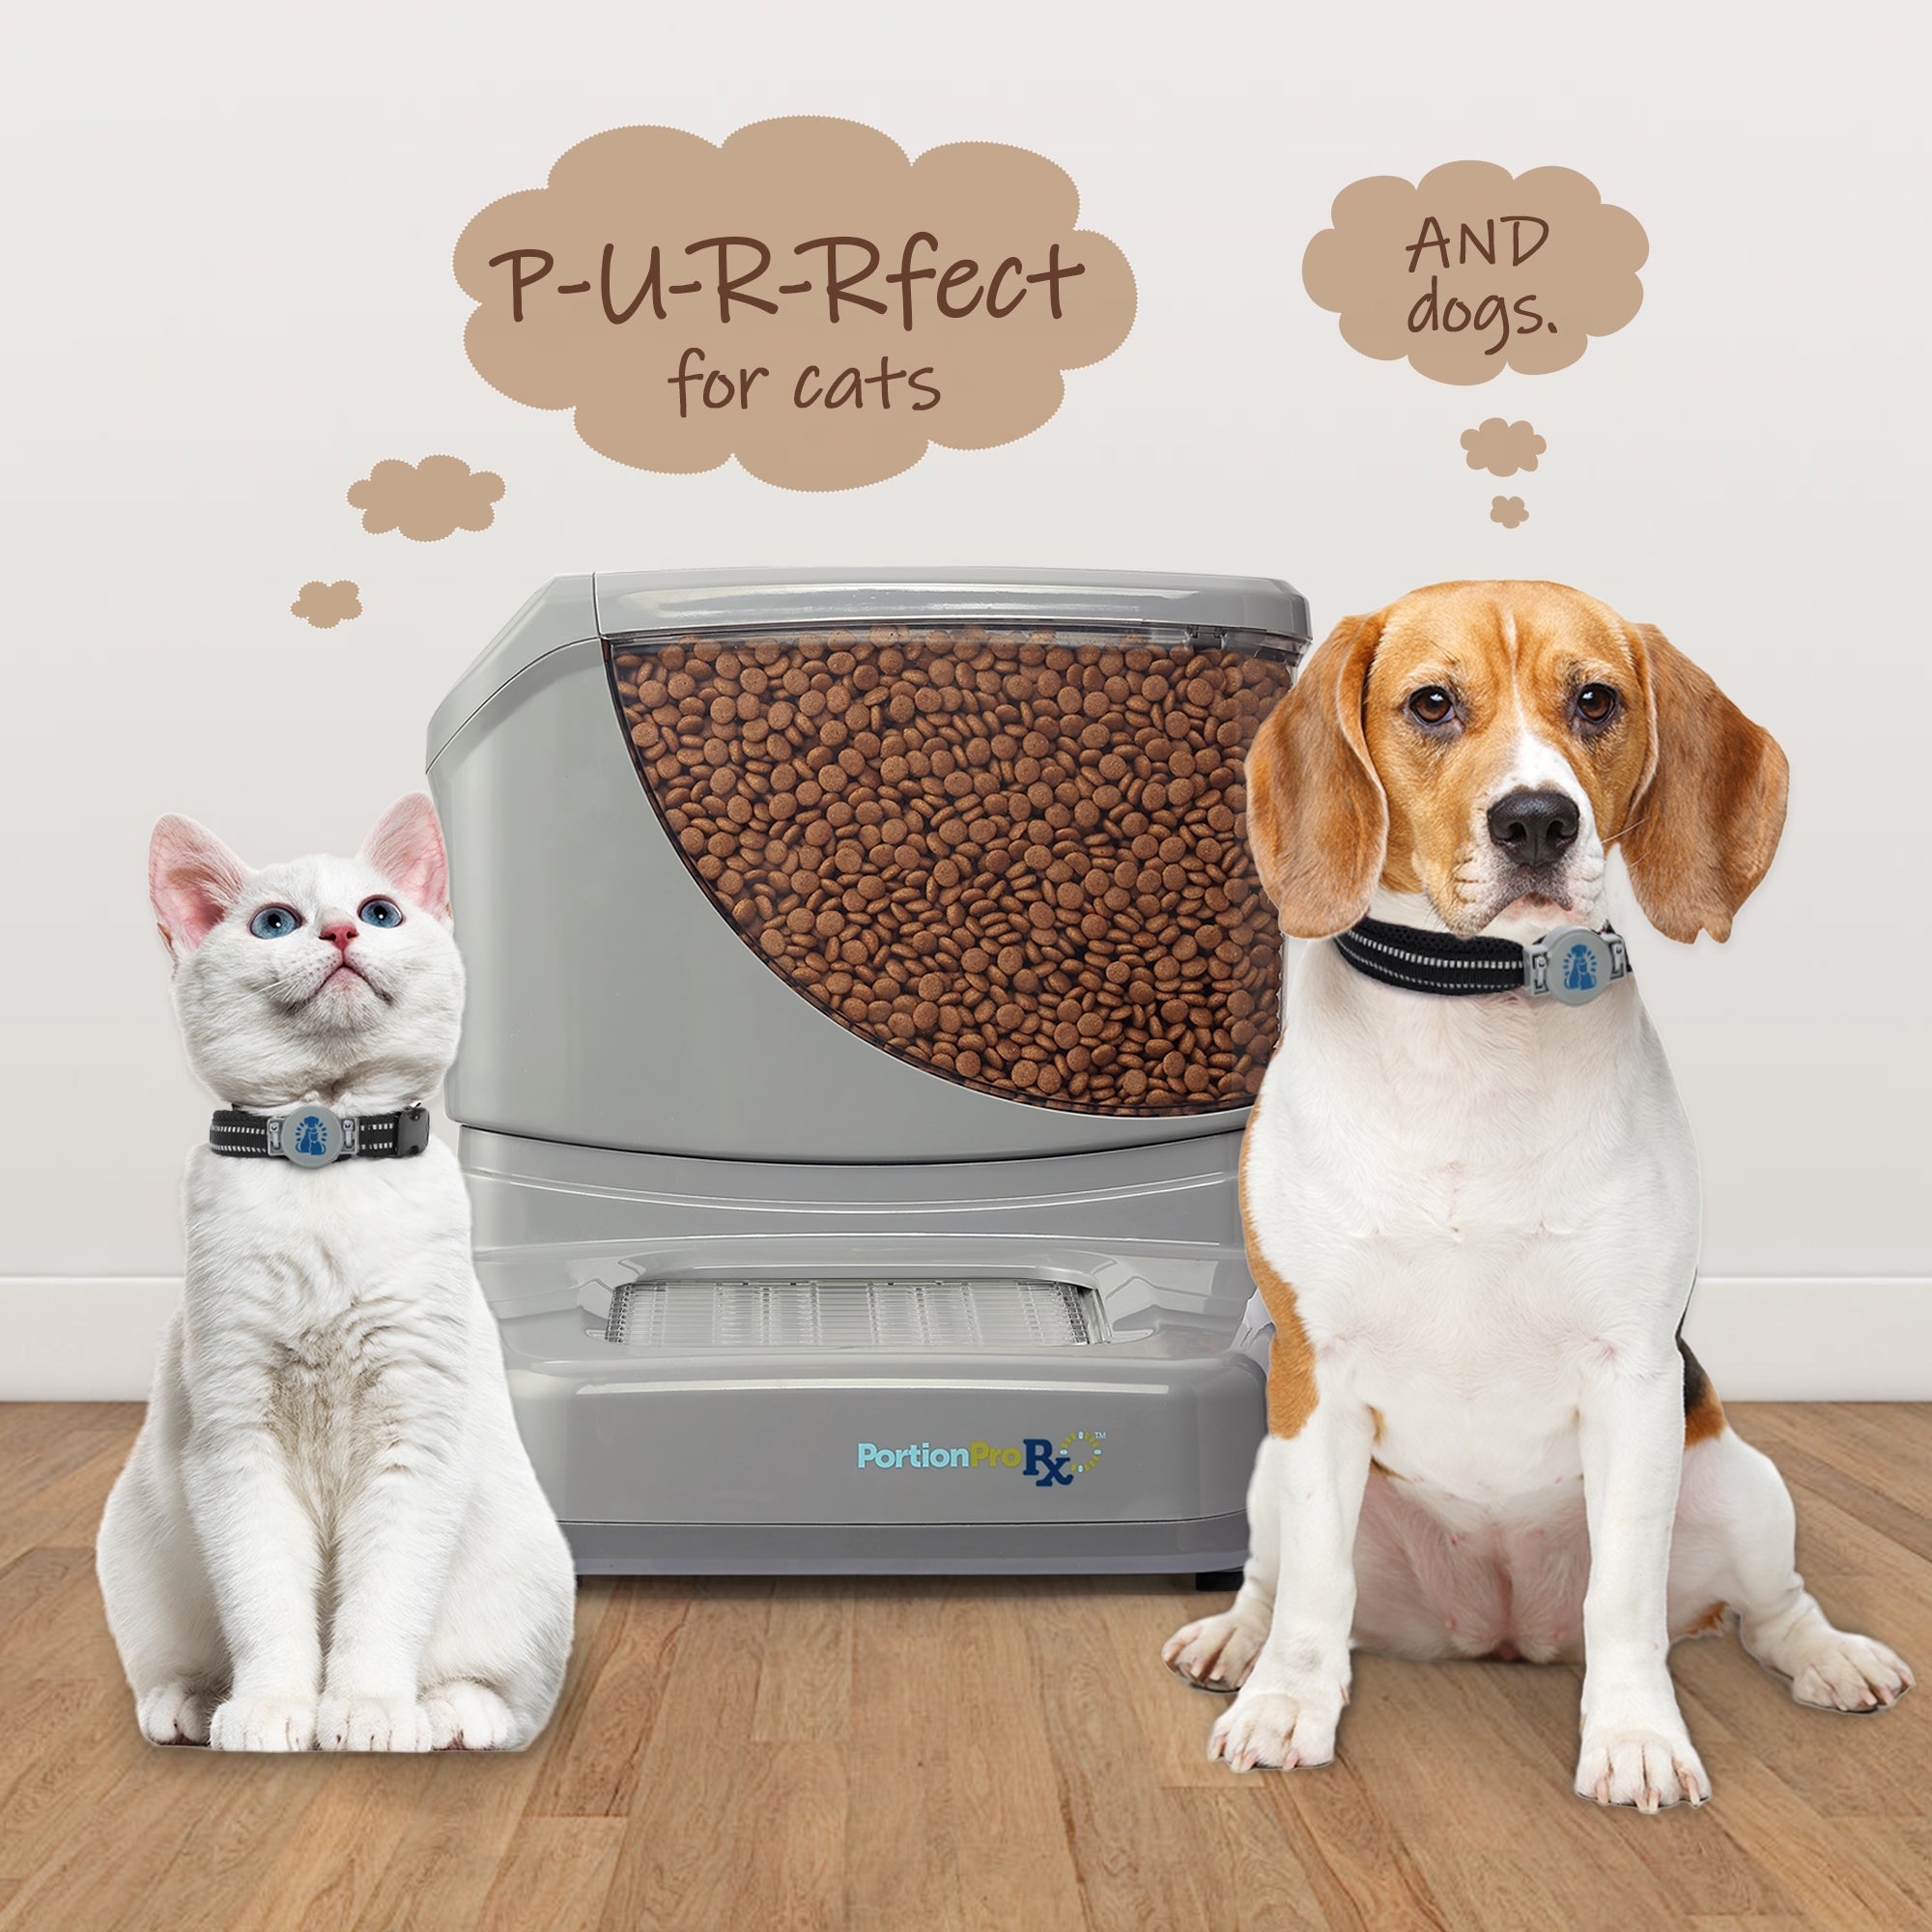 a cat and dog with the rfid tag and portionpro rx pet feeder for scheduled meal times